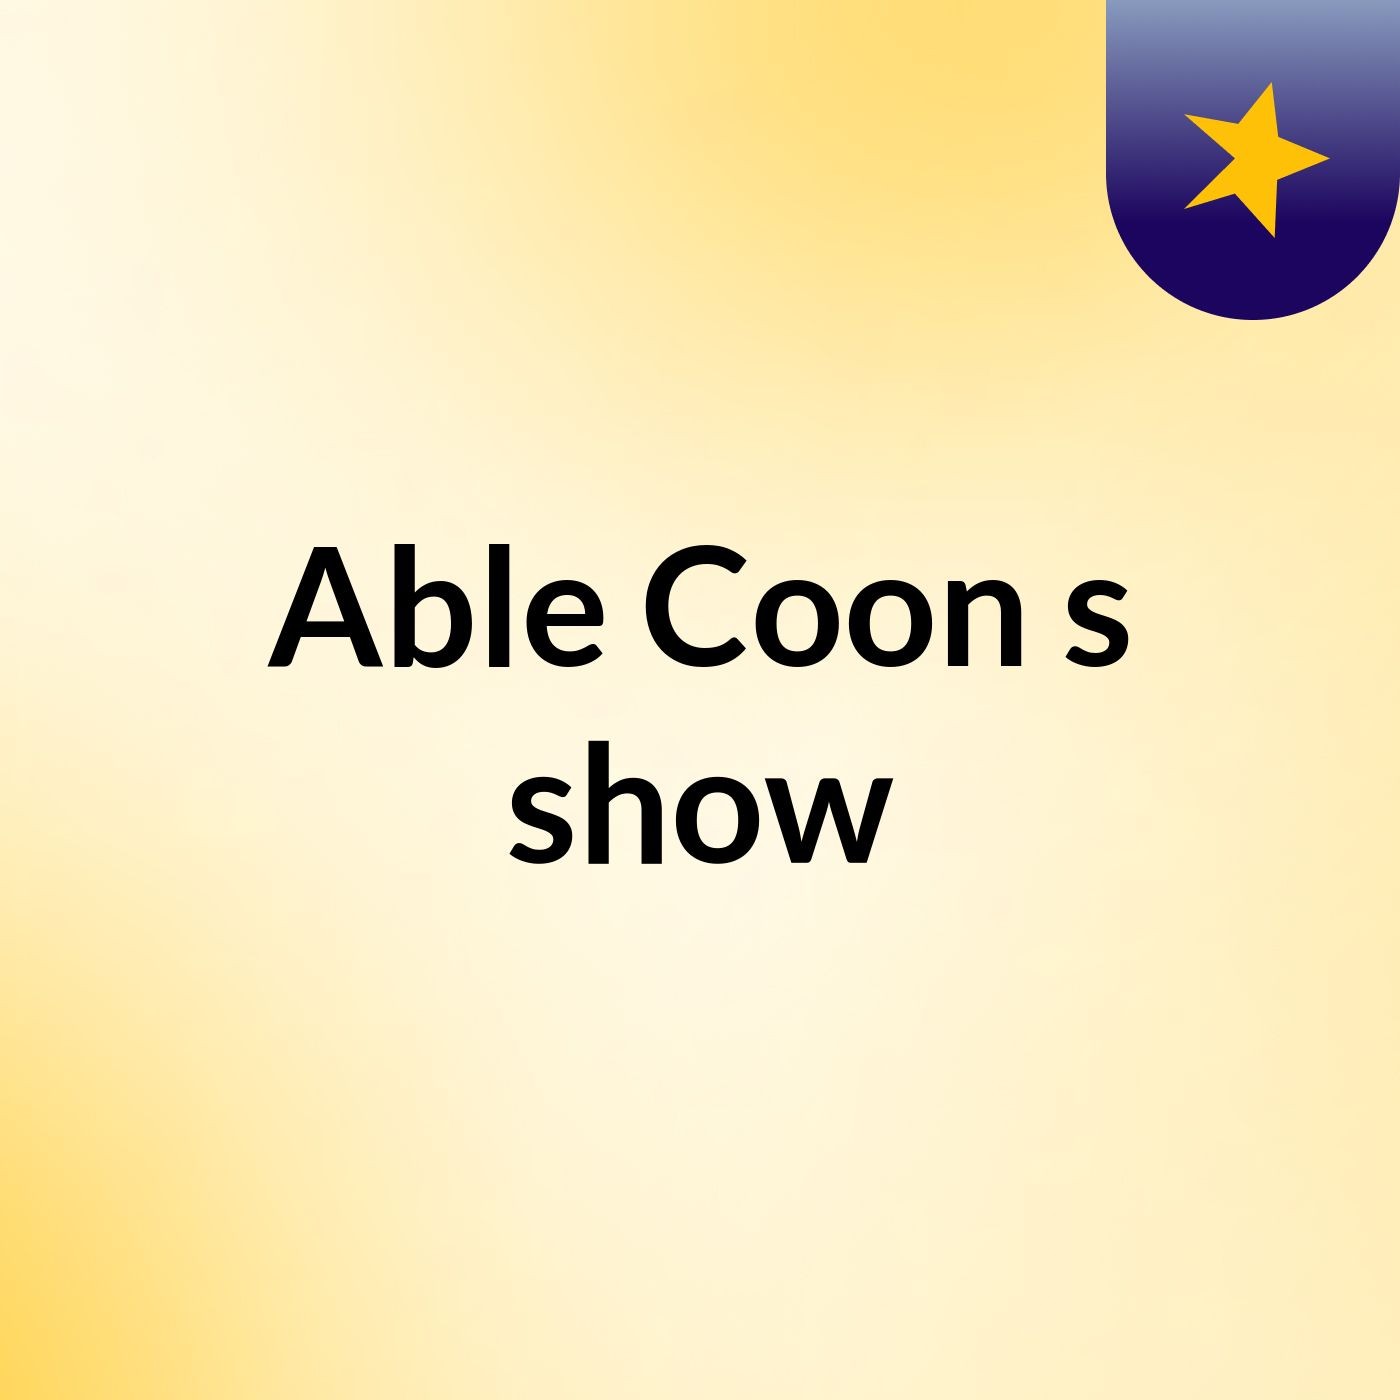 Able Coon's show